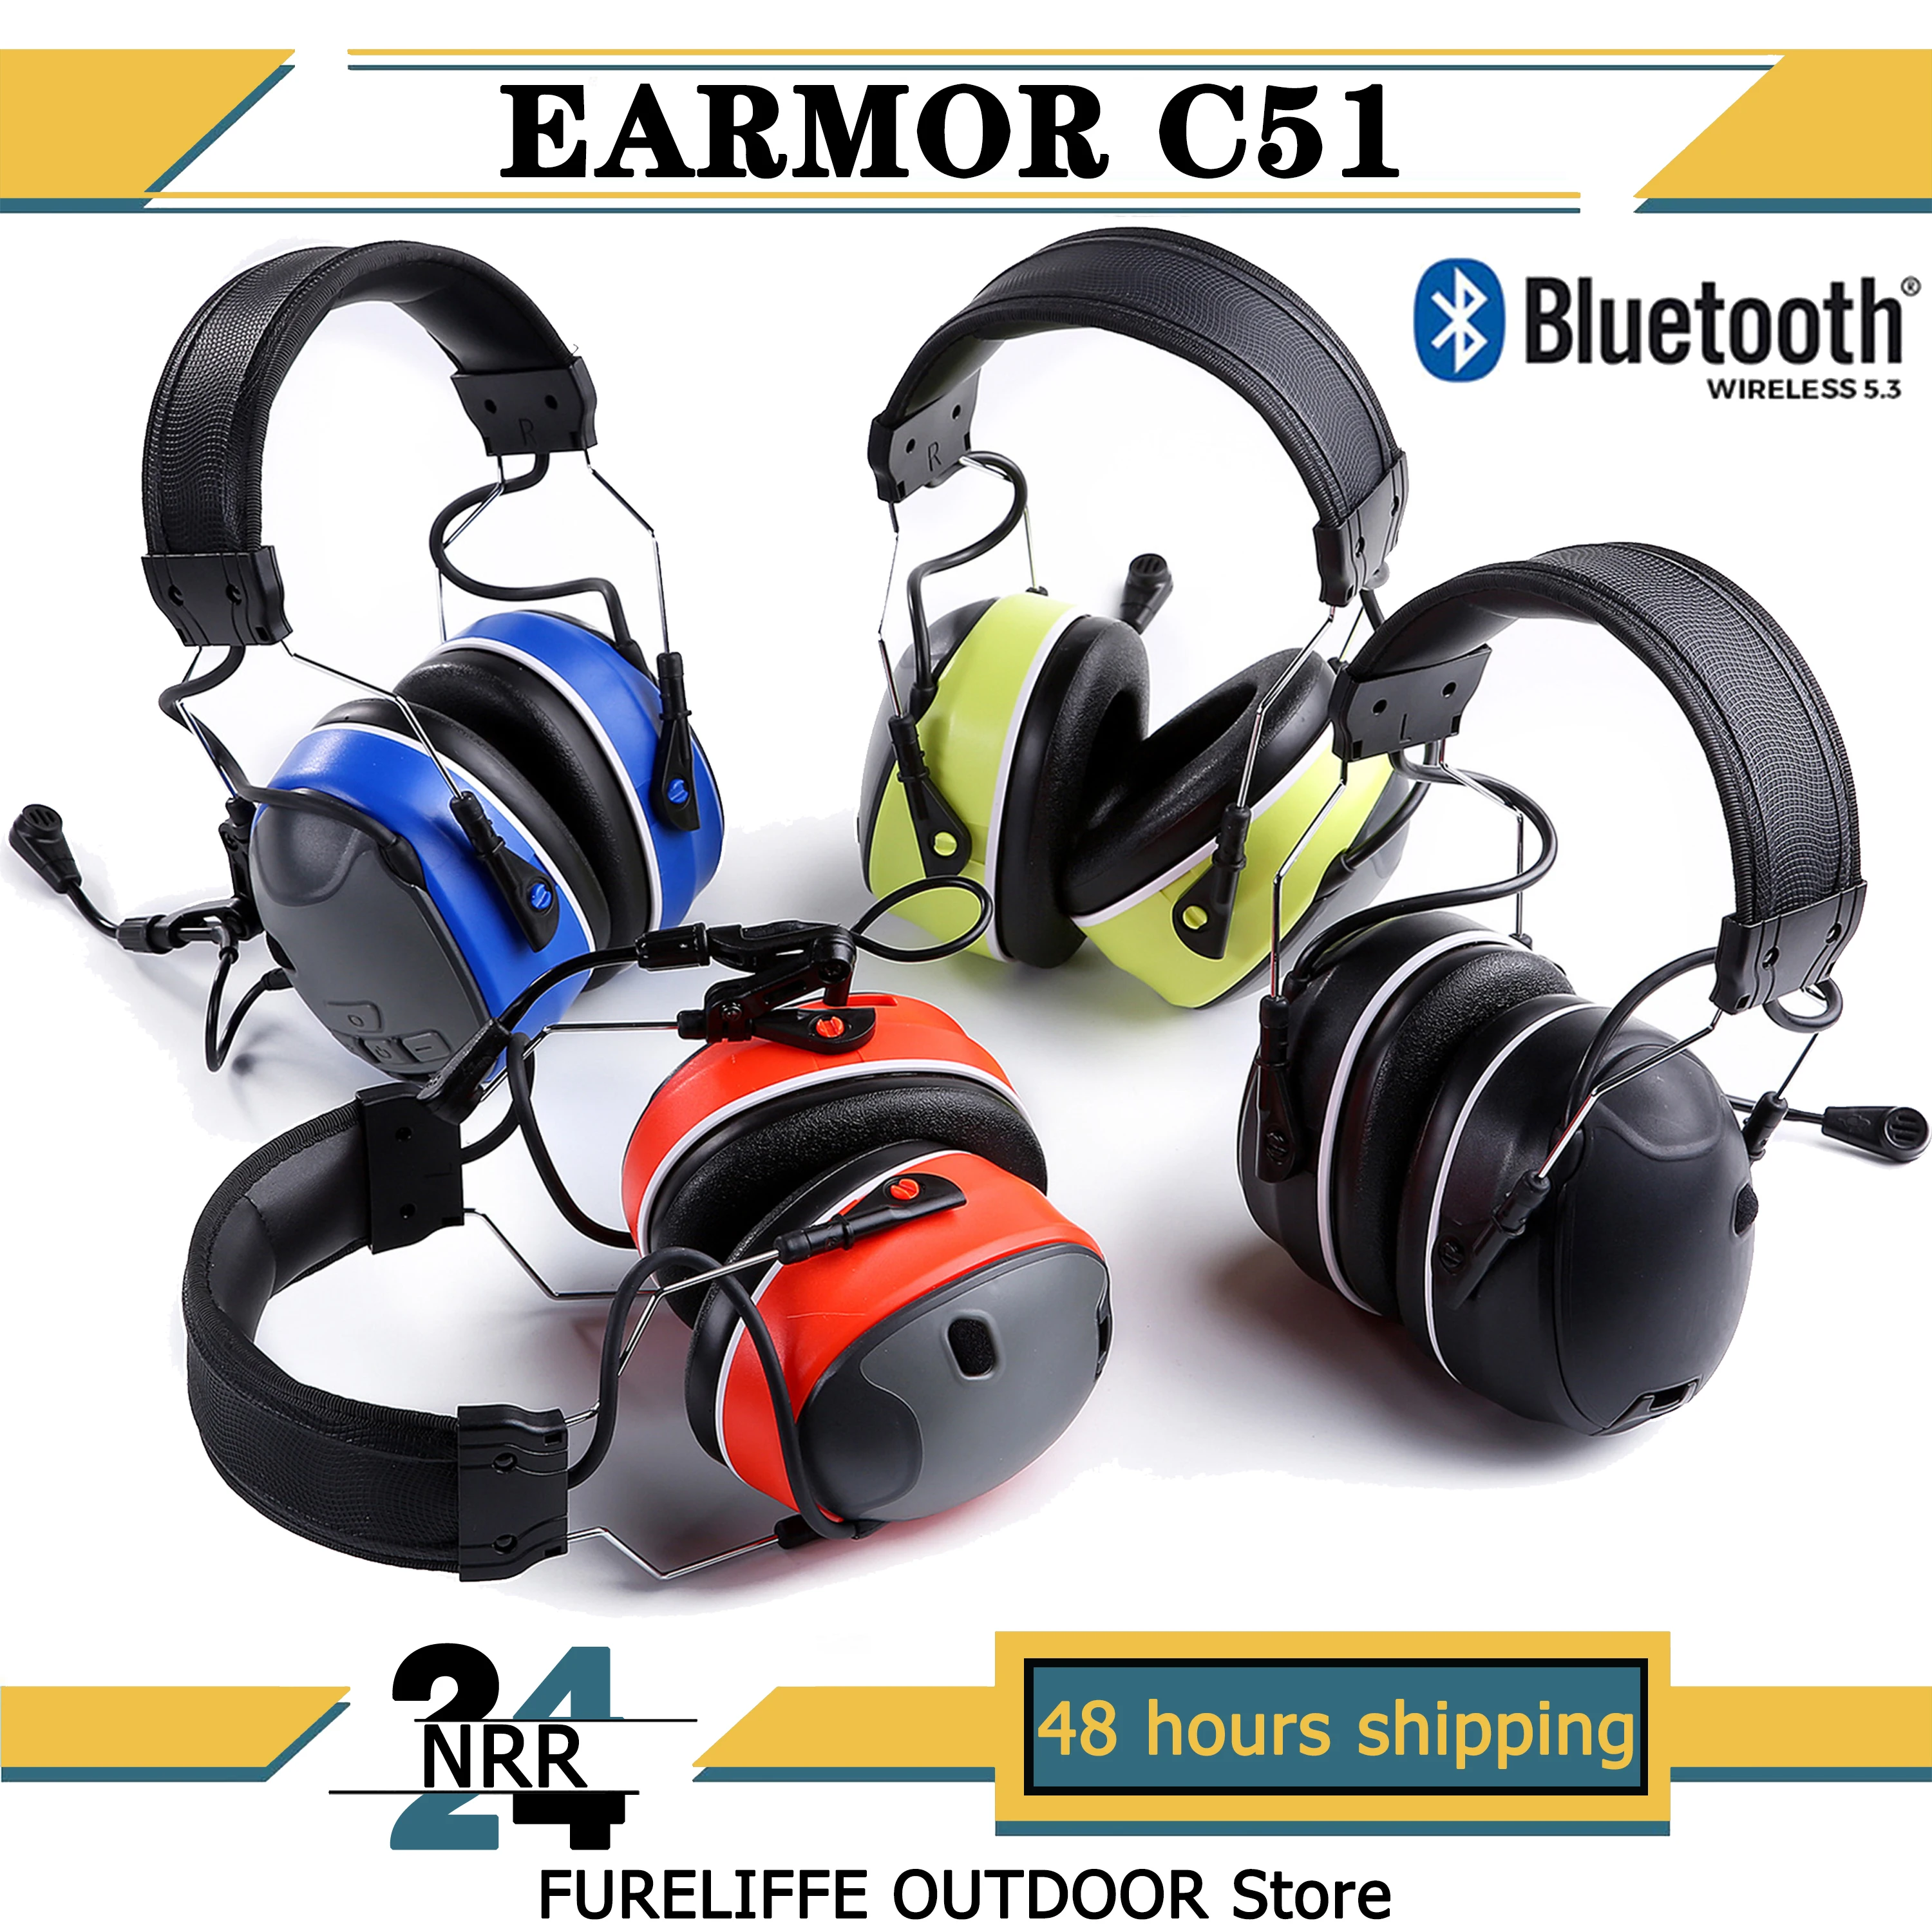 

Bluetooth C51 EARMOR electronic noise-cancelling headset military airsoft shooting earmuffs hearing protection headset